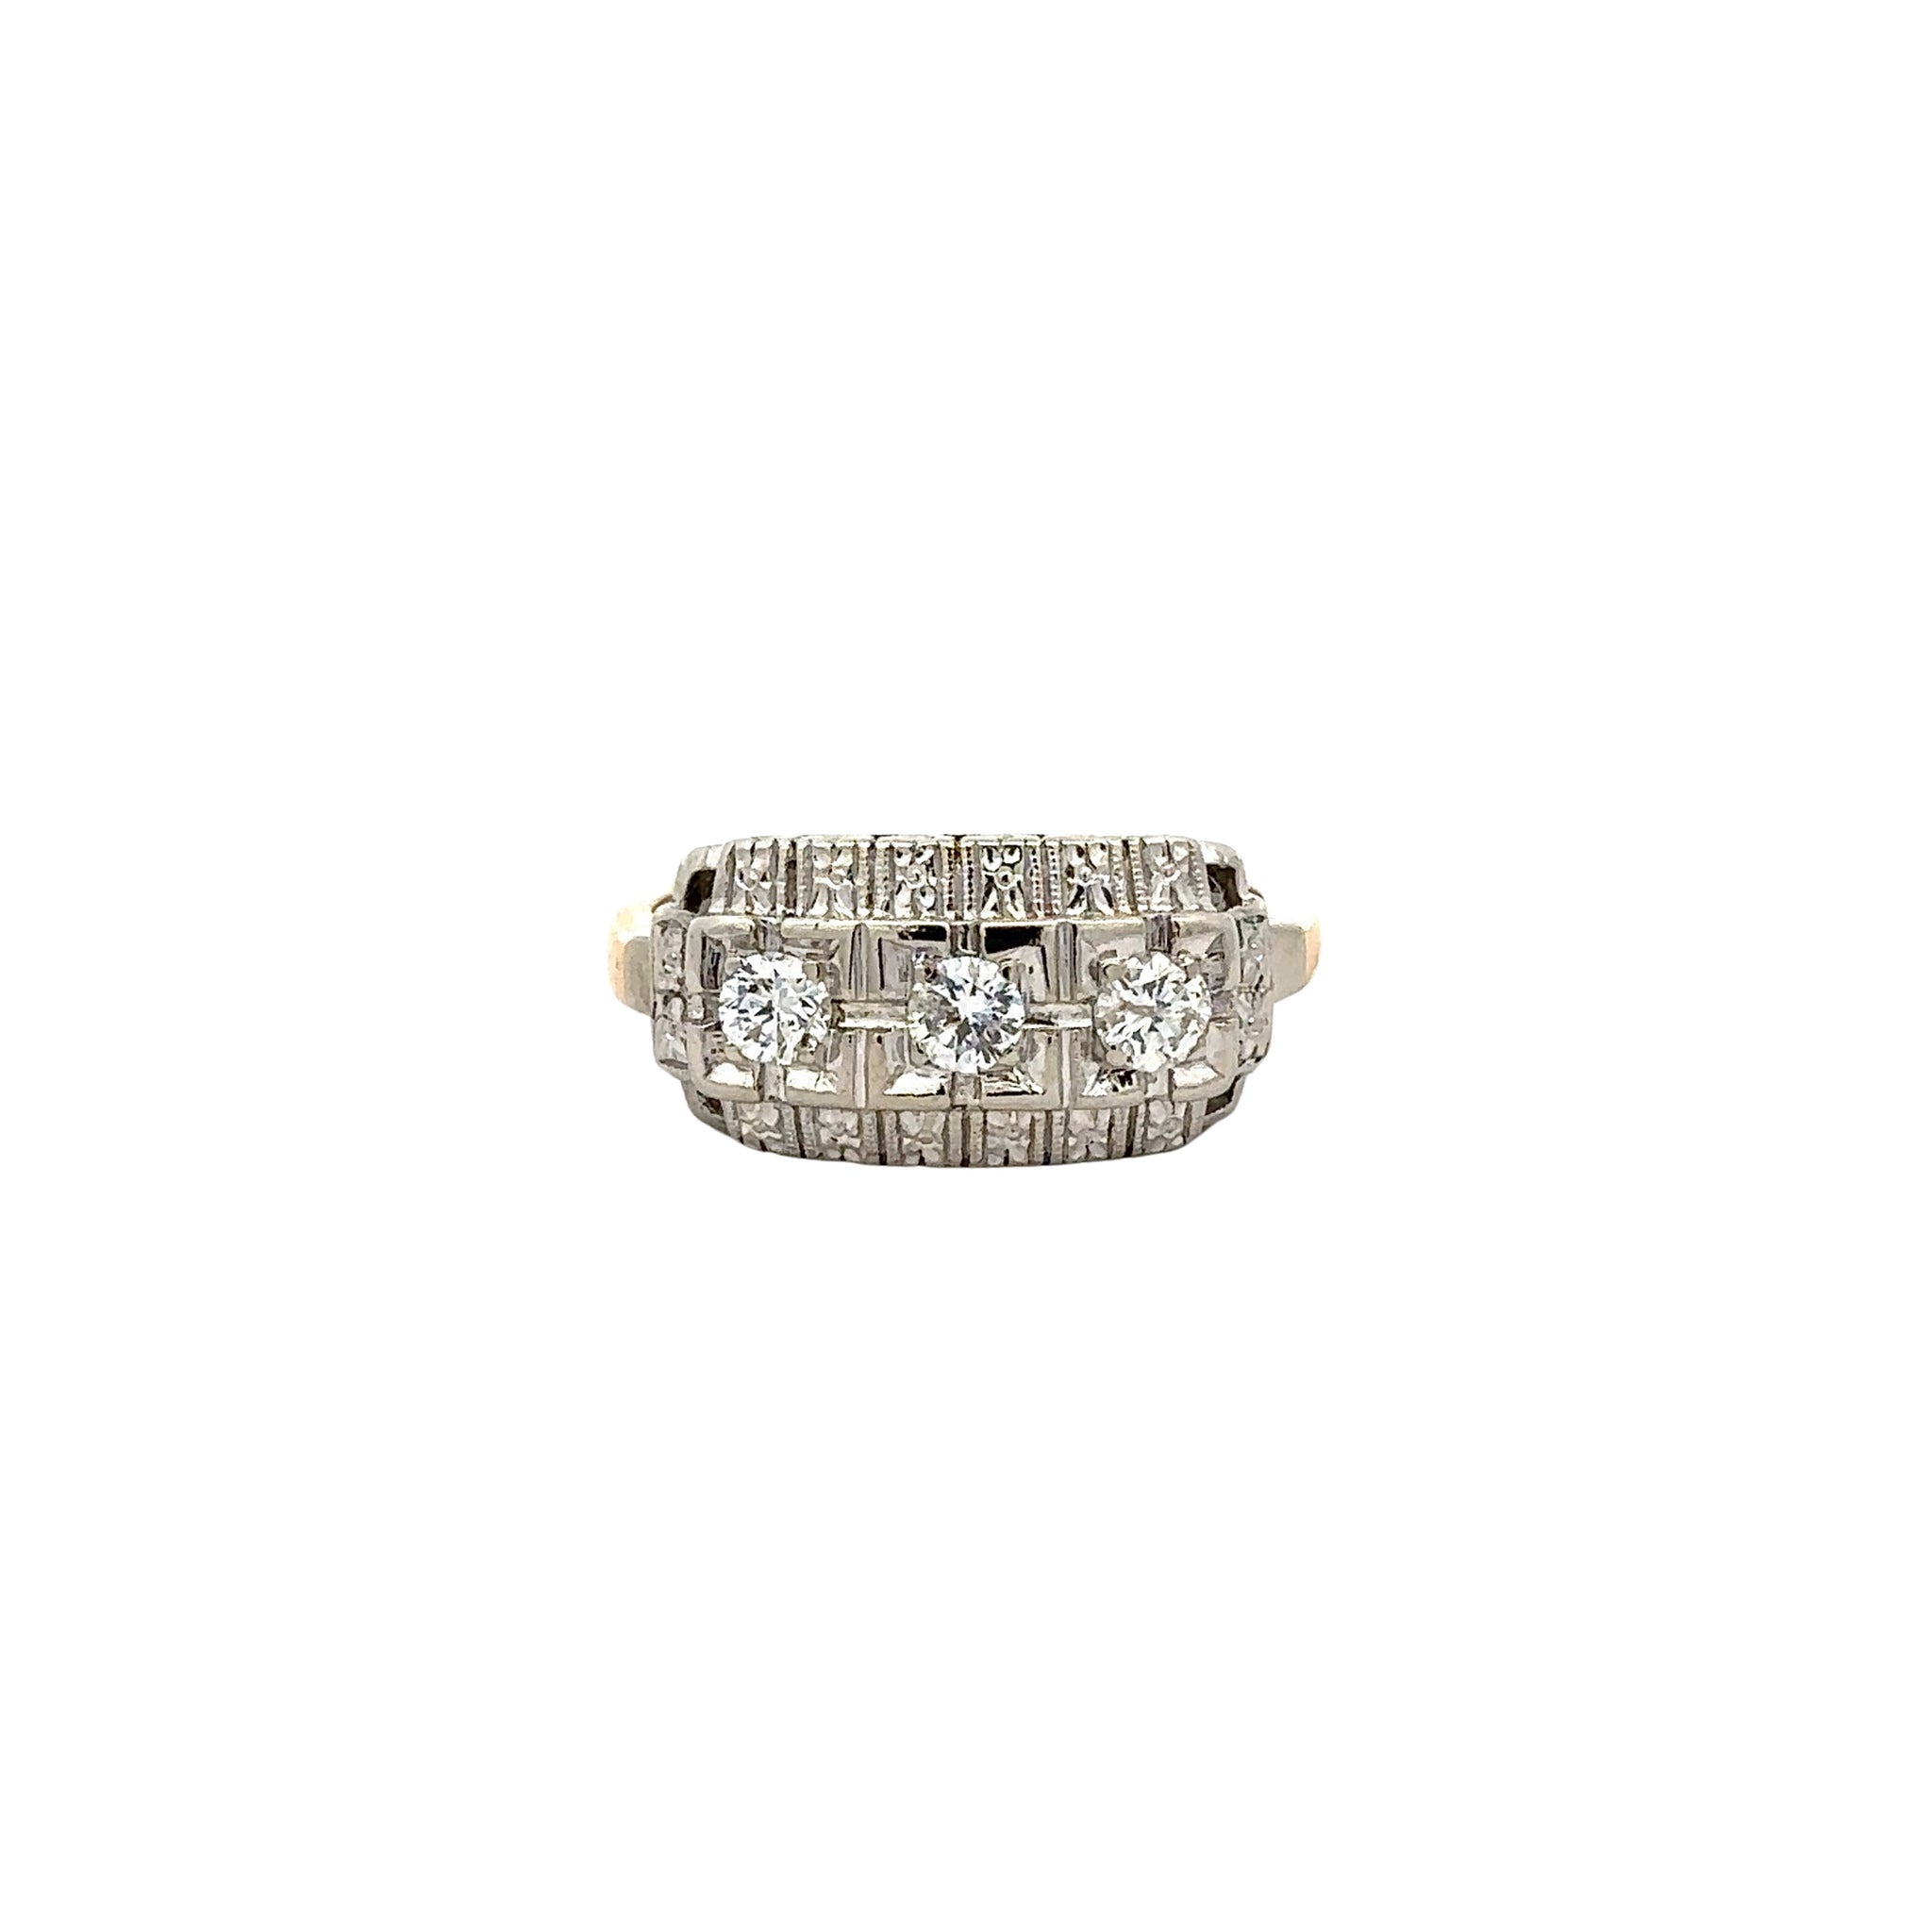 360 video of white and yellow gold diamond antique like ring with 3 round diamonds